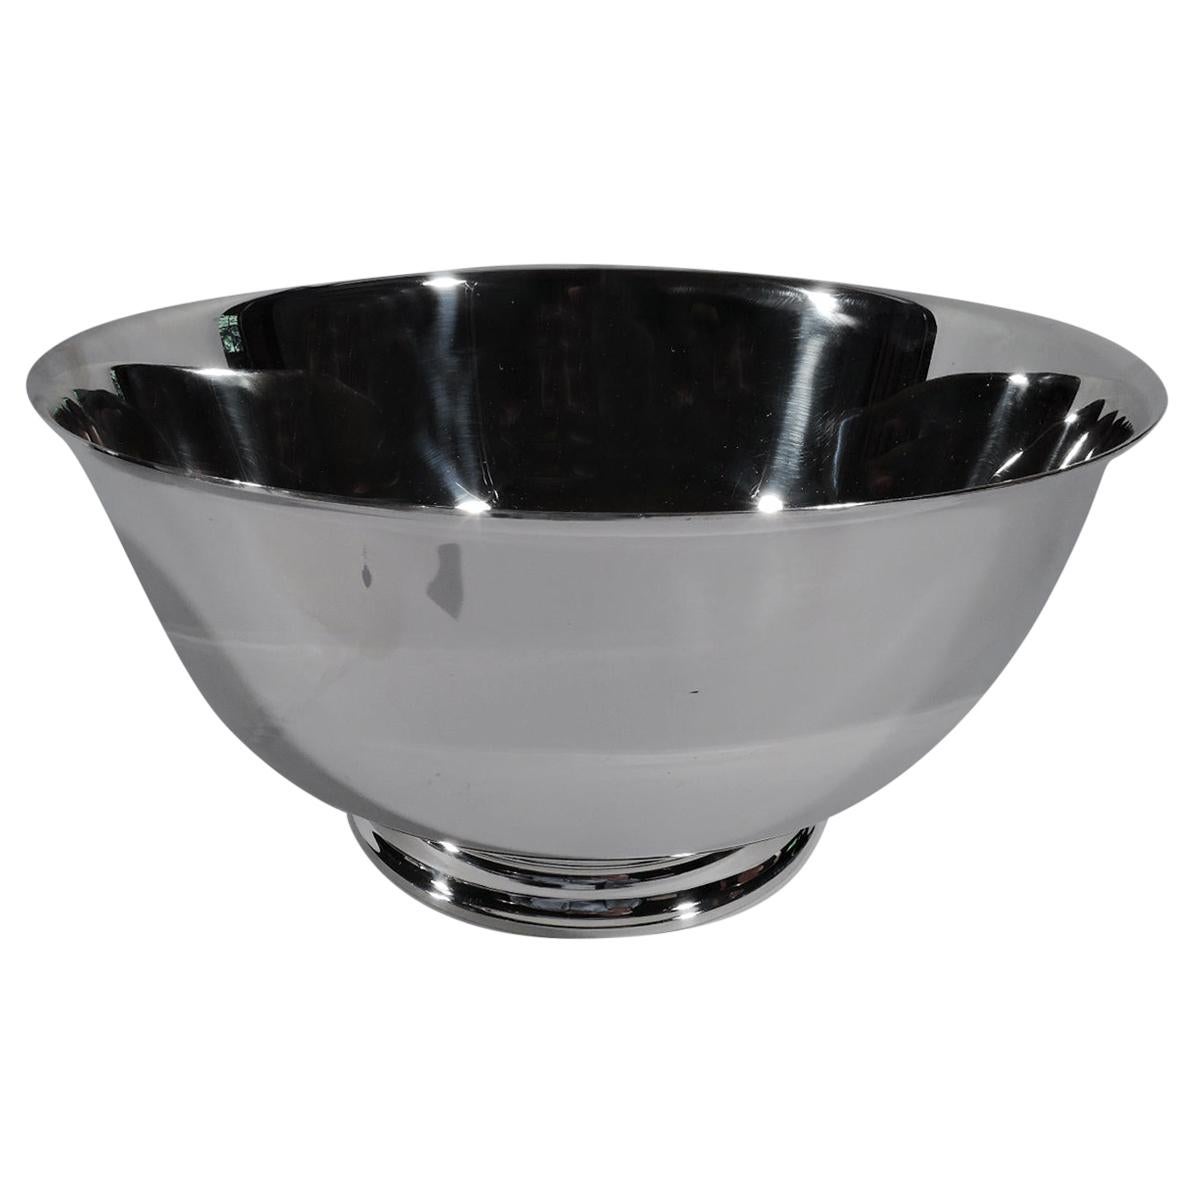 Tiffany Large and Modern Sterling Silver Showcase-Quality Trophy Bowl